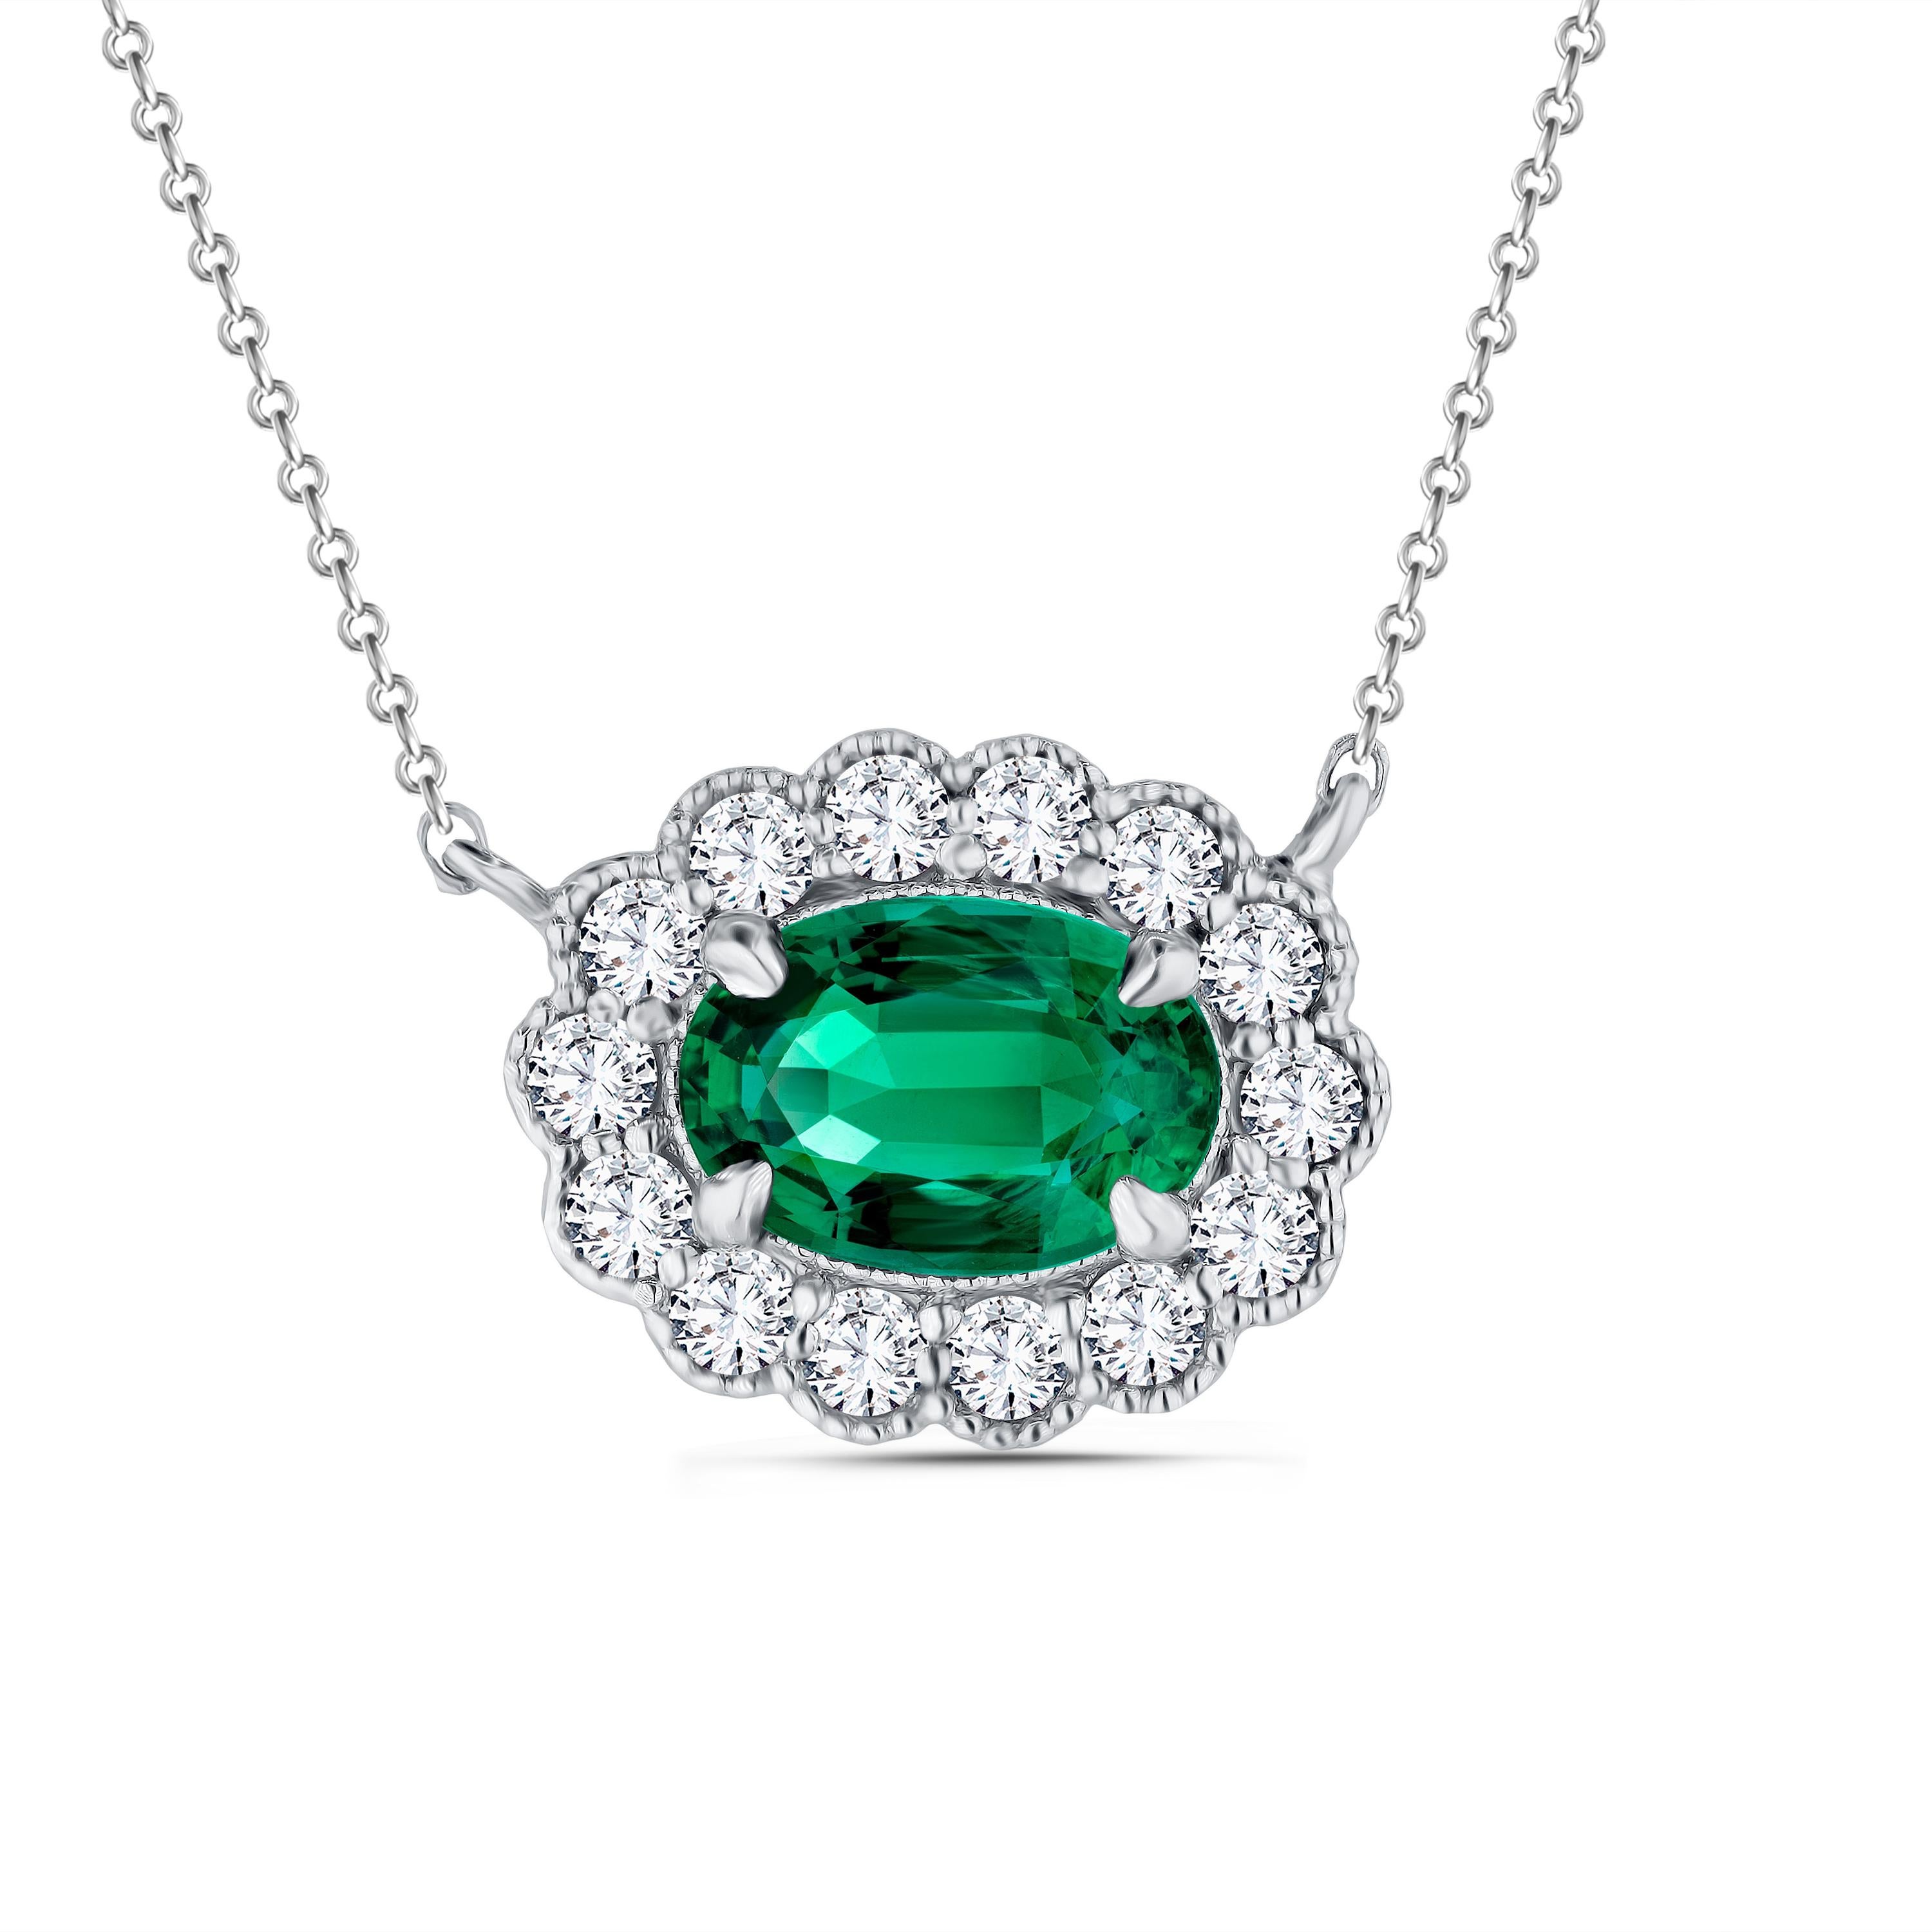 Timeless elegance meets modern allure in this beautiful emerald pendant.

At the heart of this masterpiece lies a 1.16 carat oval cut emerald, a gem of unparalleled beauty, exuding a mesmerizing green hue. Enveloping this emerald is a delicate halo